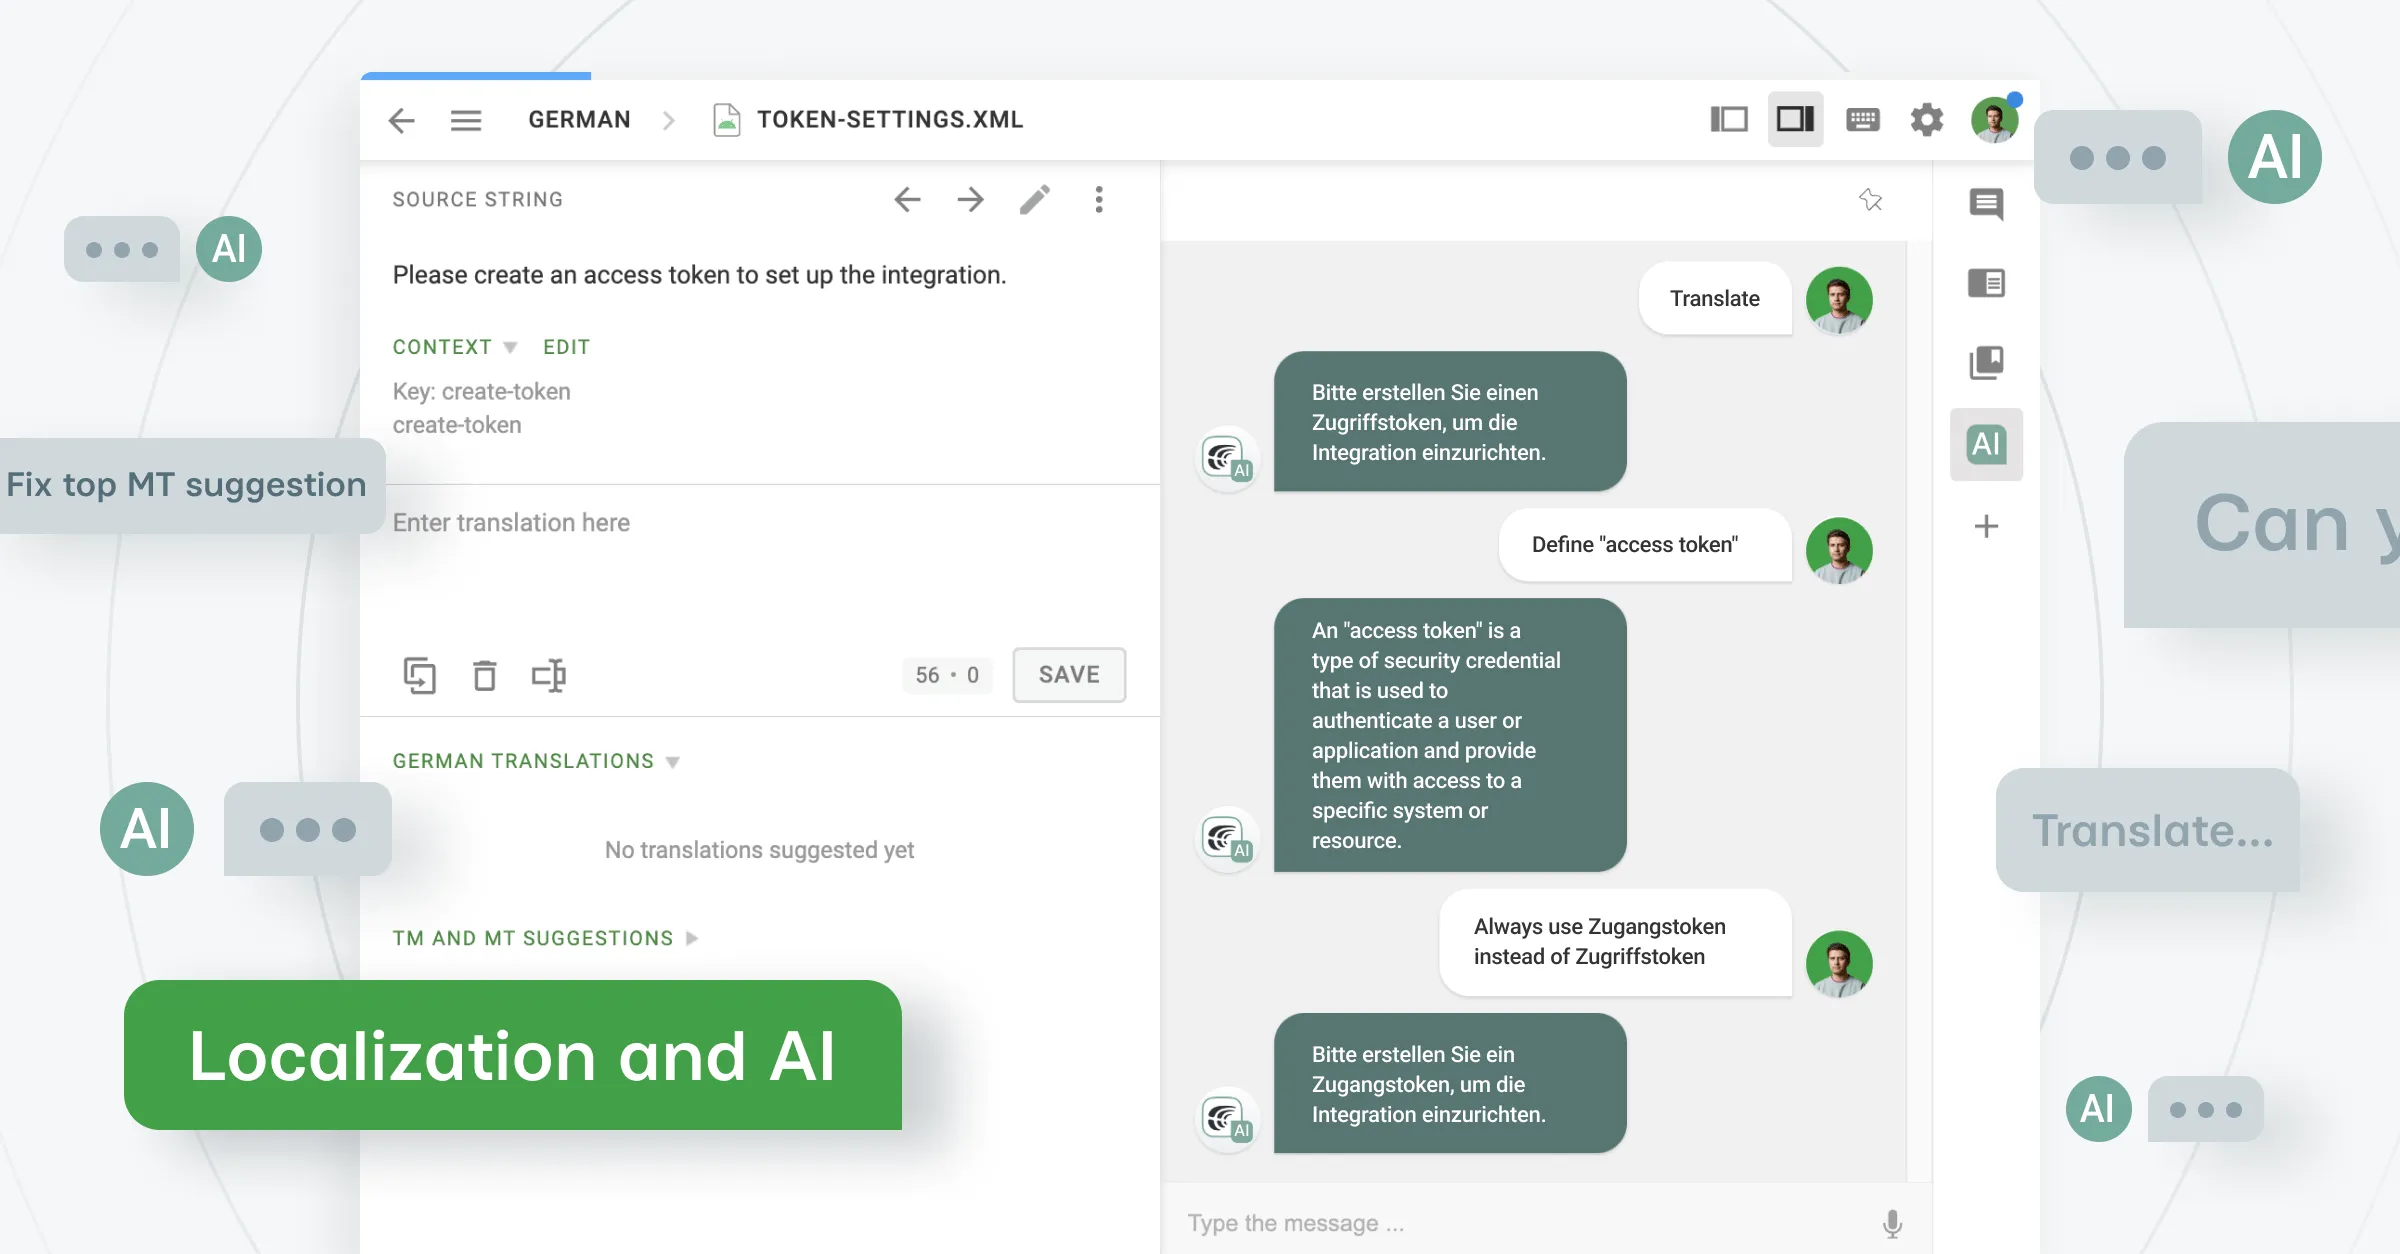 Introducing the AI chatbot App for Crowdin